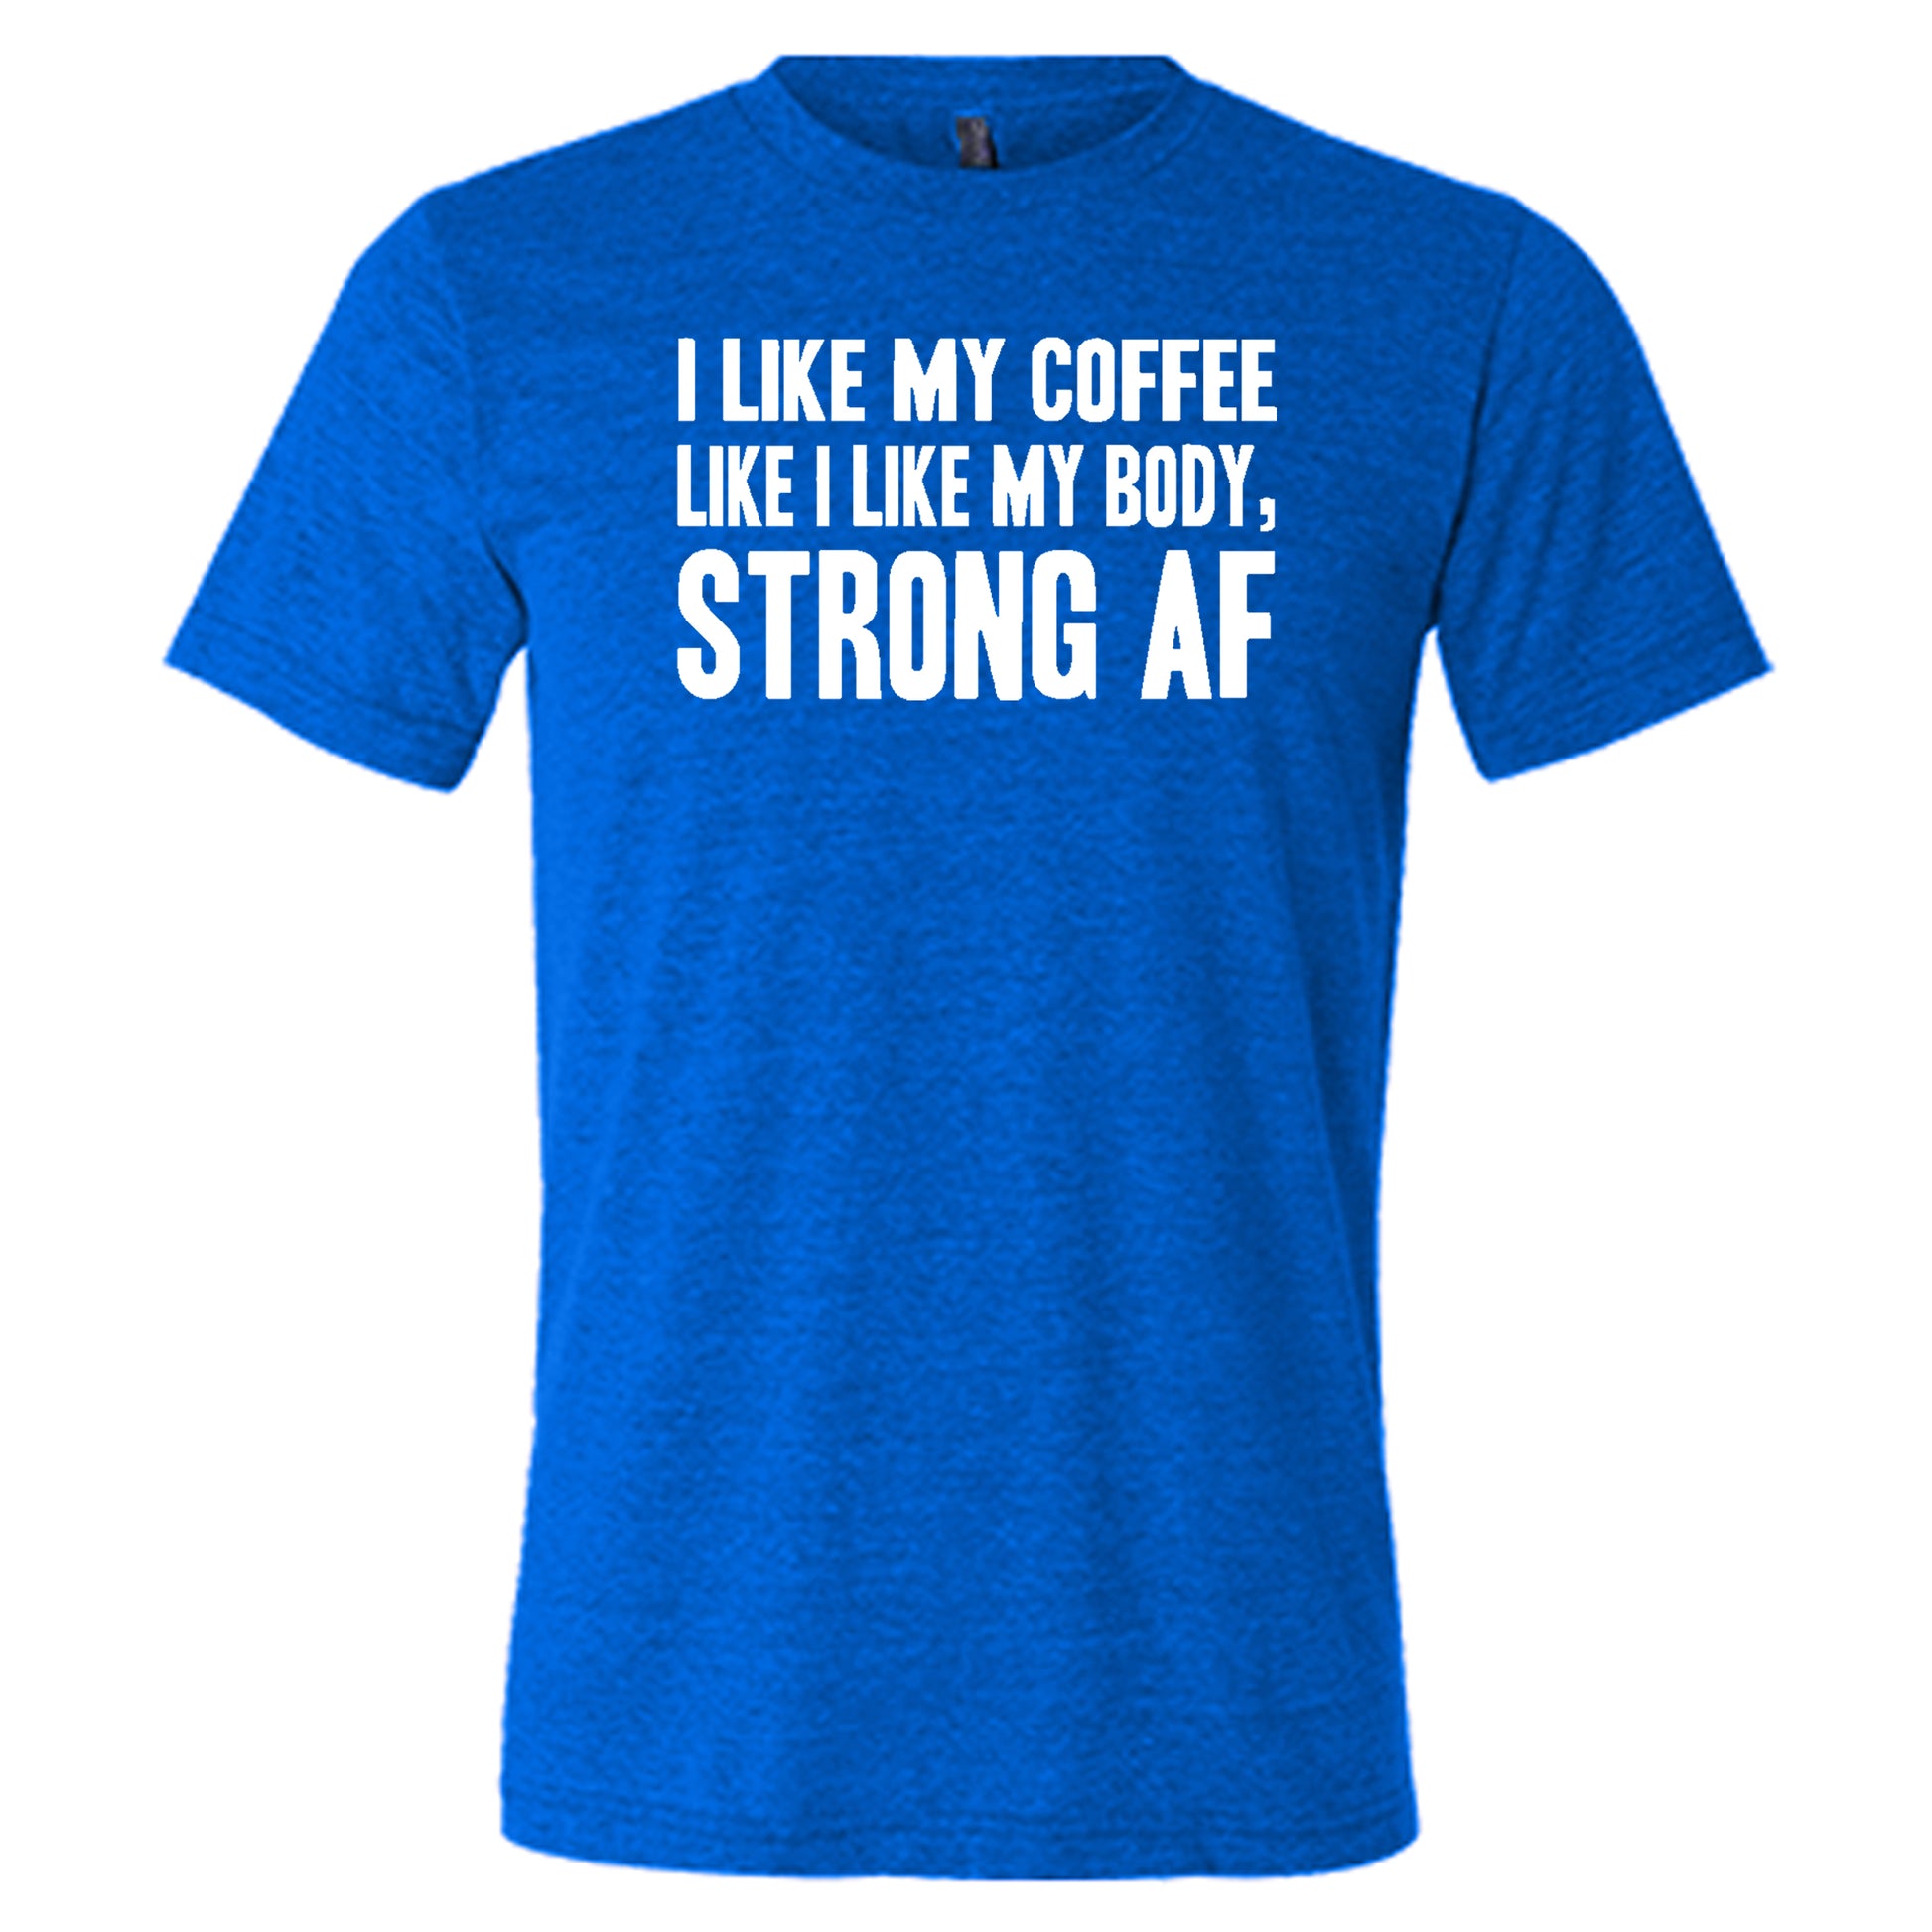 "I Like My Coffee Like I Like My Body Strong AF" quote in white lettering on blue unisex tee